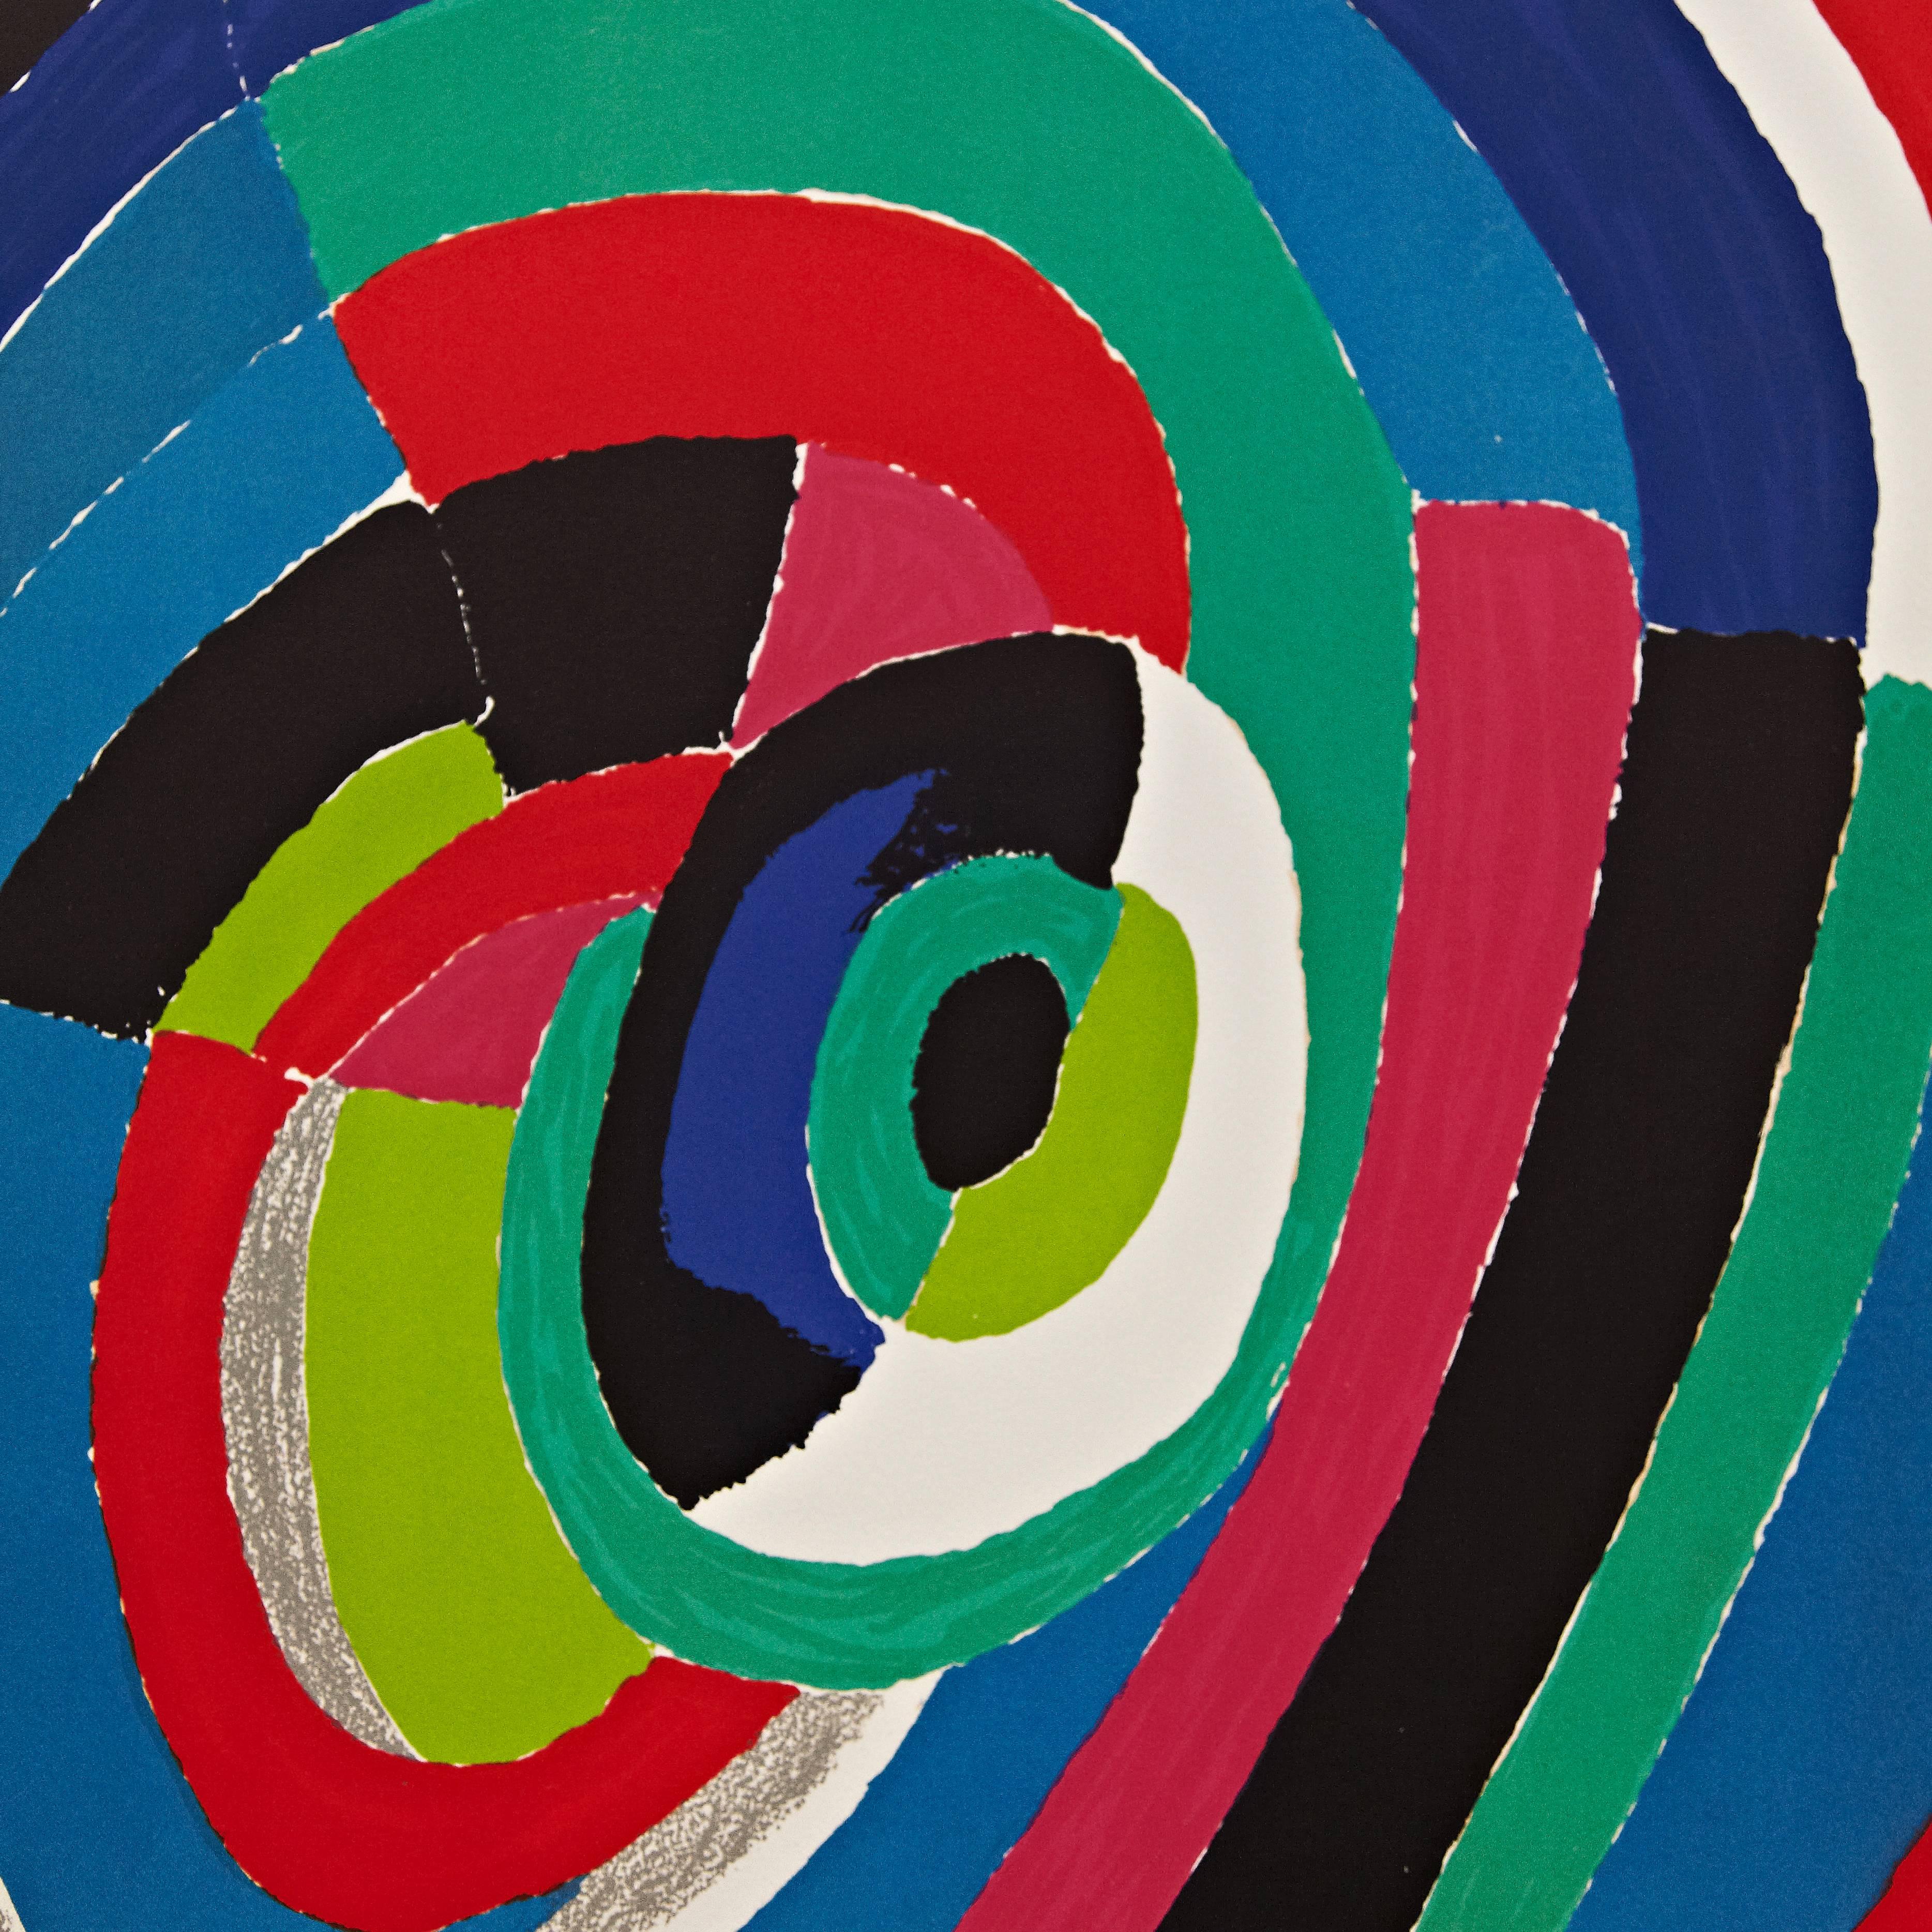 Litography by Sonia Delaunay.
Arches Paper, Stamped and signed.
16/25 numbered
Provenance: France

Sonia Delaunay (1885 - 1979) was a Ukrainian-born French artist, who spent most of her working life in Paris and, with her husband Robert